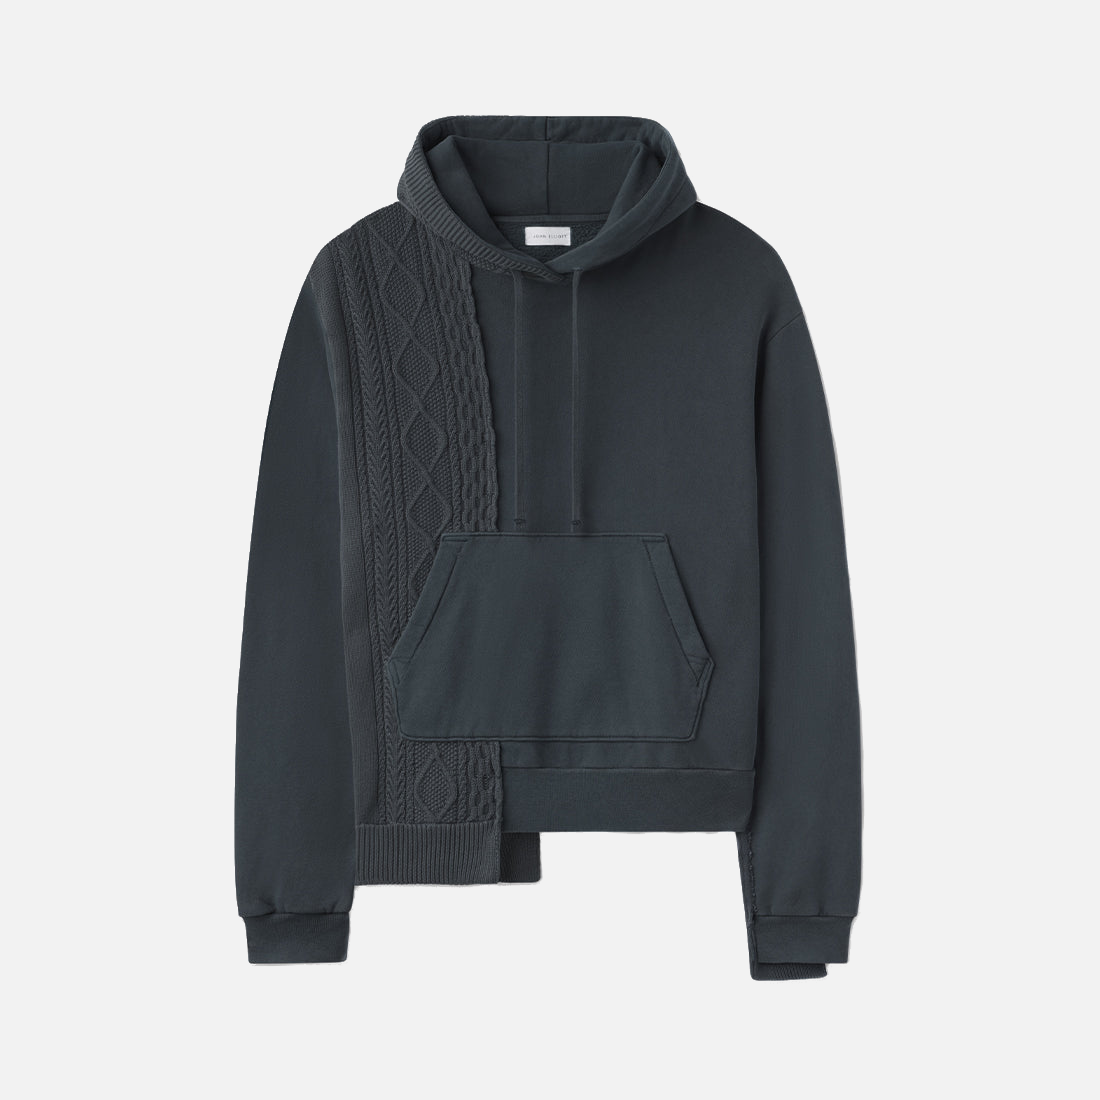 CABLE KNIT RECONSTRUCTED HOODIE - WASHED BLACK